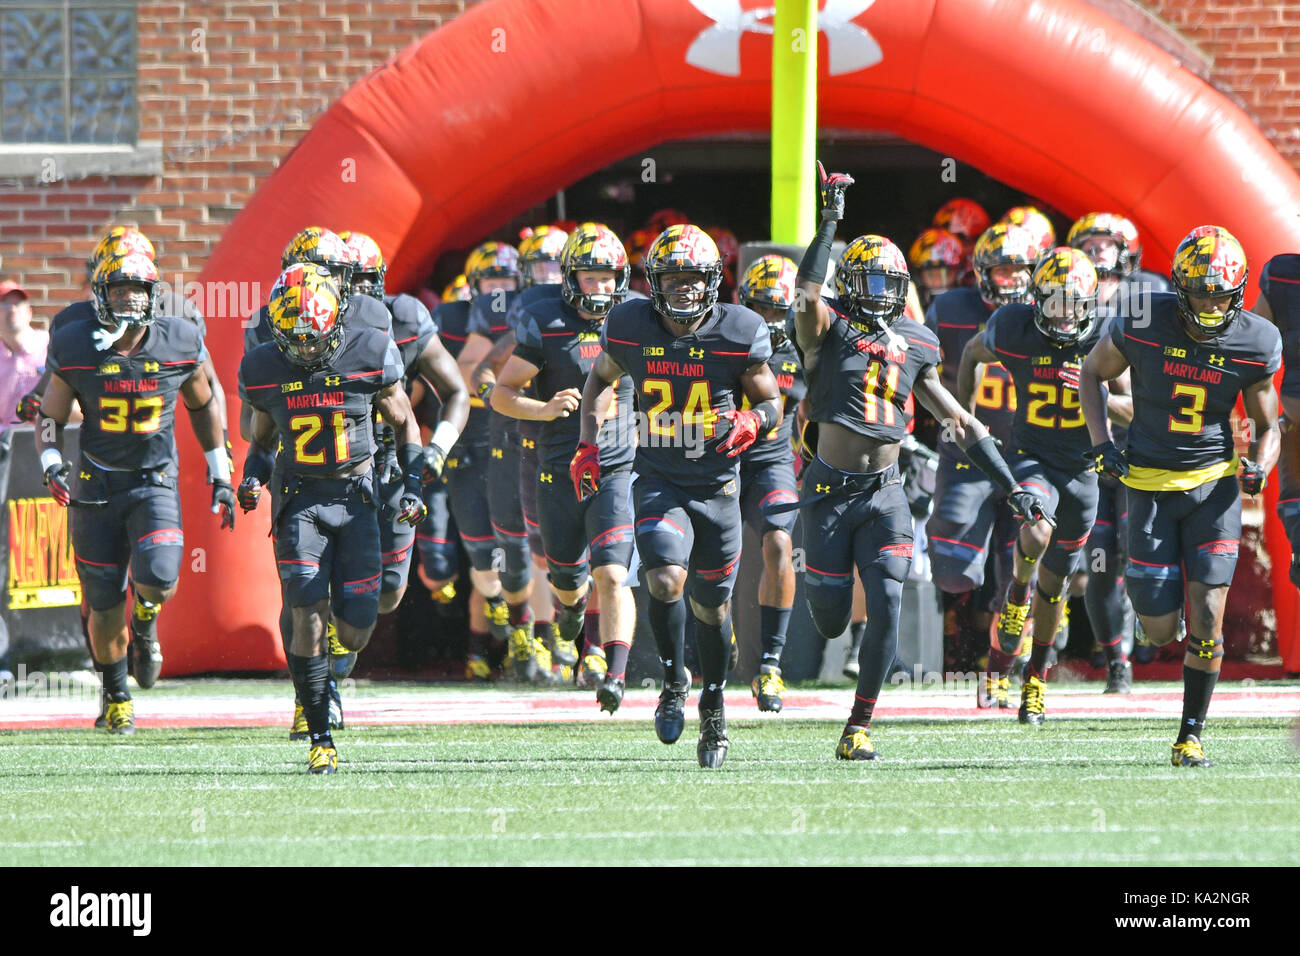 College Park, Maryland, USA. 23rd Sep, 2017. Maryland Terrapins quarterback KASIM HILL (11) leads his team on the field prior to a game played at Maryland Stadium at College Park, MD. UCF beat Maryland 38-10. Credit: Ken Inness/ZUMA Wire/Alamy Live News Stock Photo